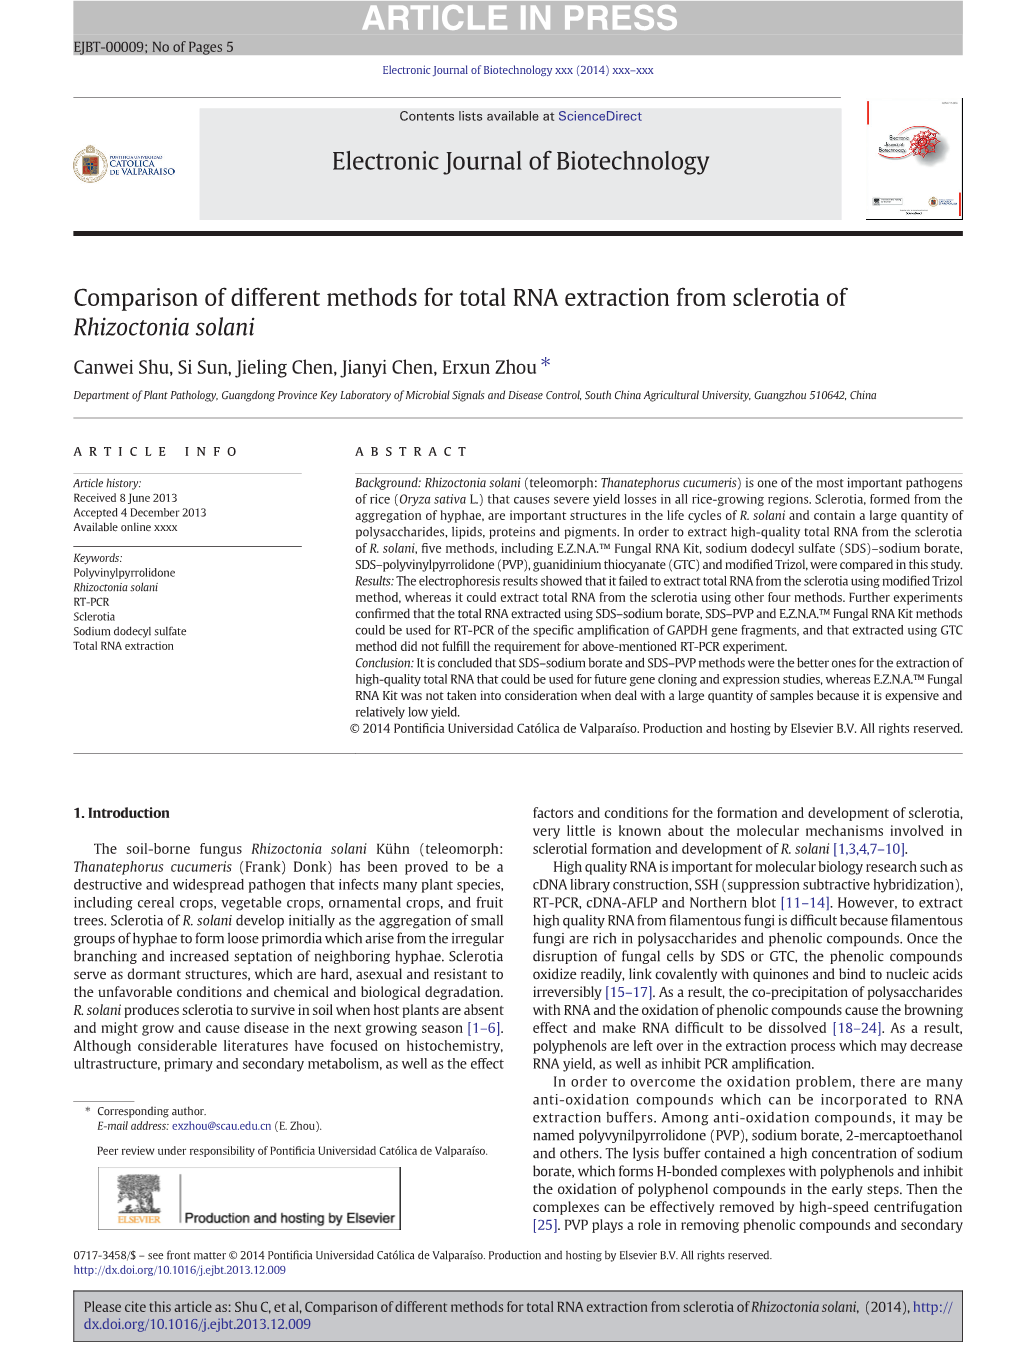 Comparison of Different Methods for Total RNA Extraction from Sclerotia of Rhizoctonia Solani